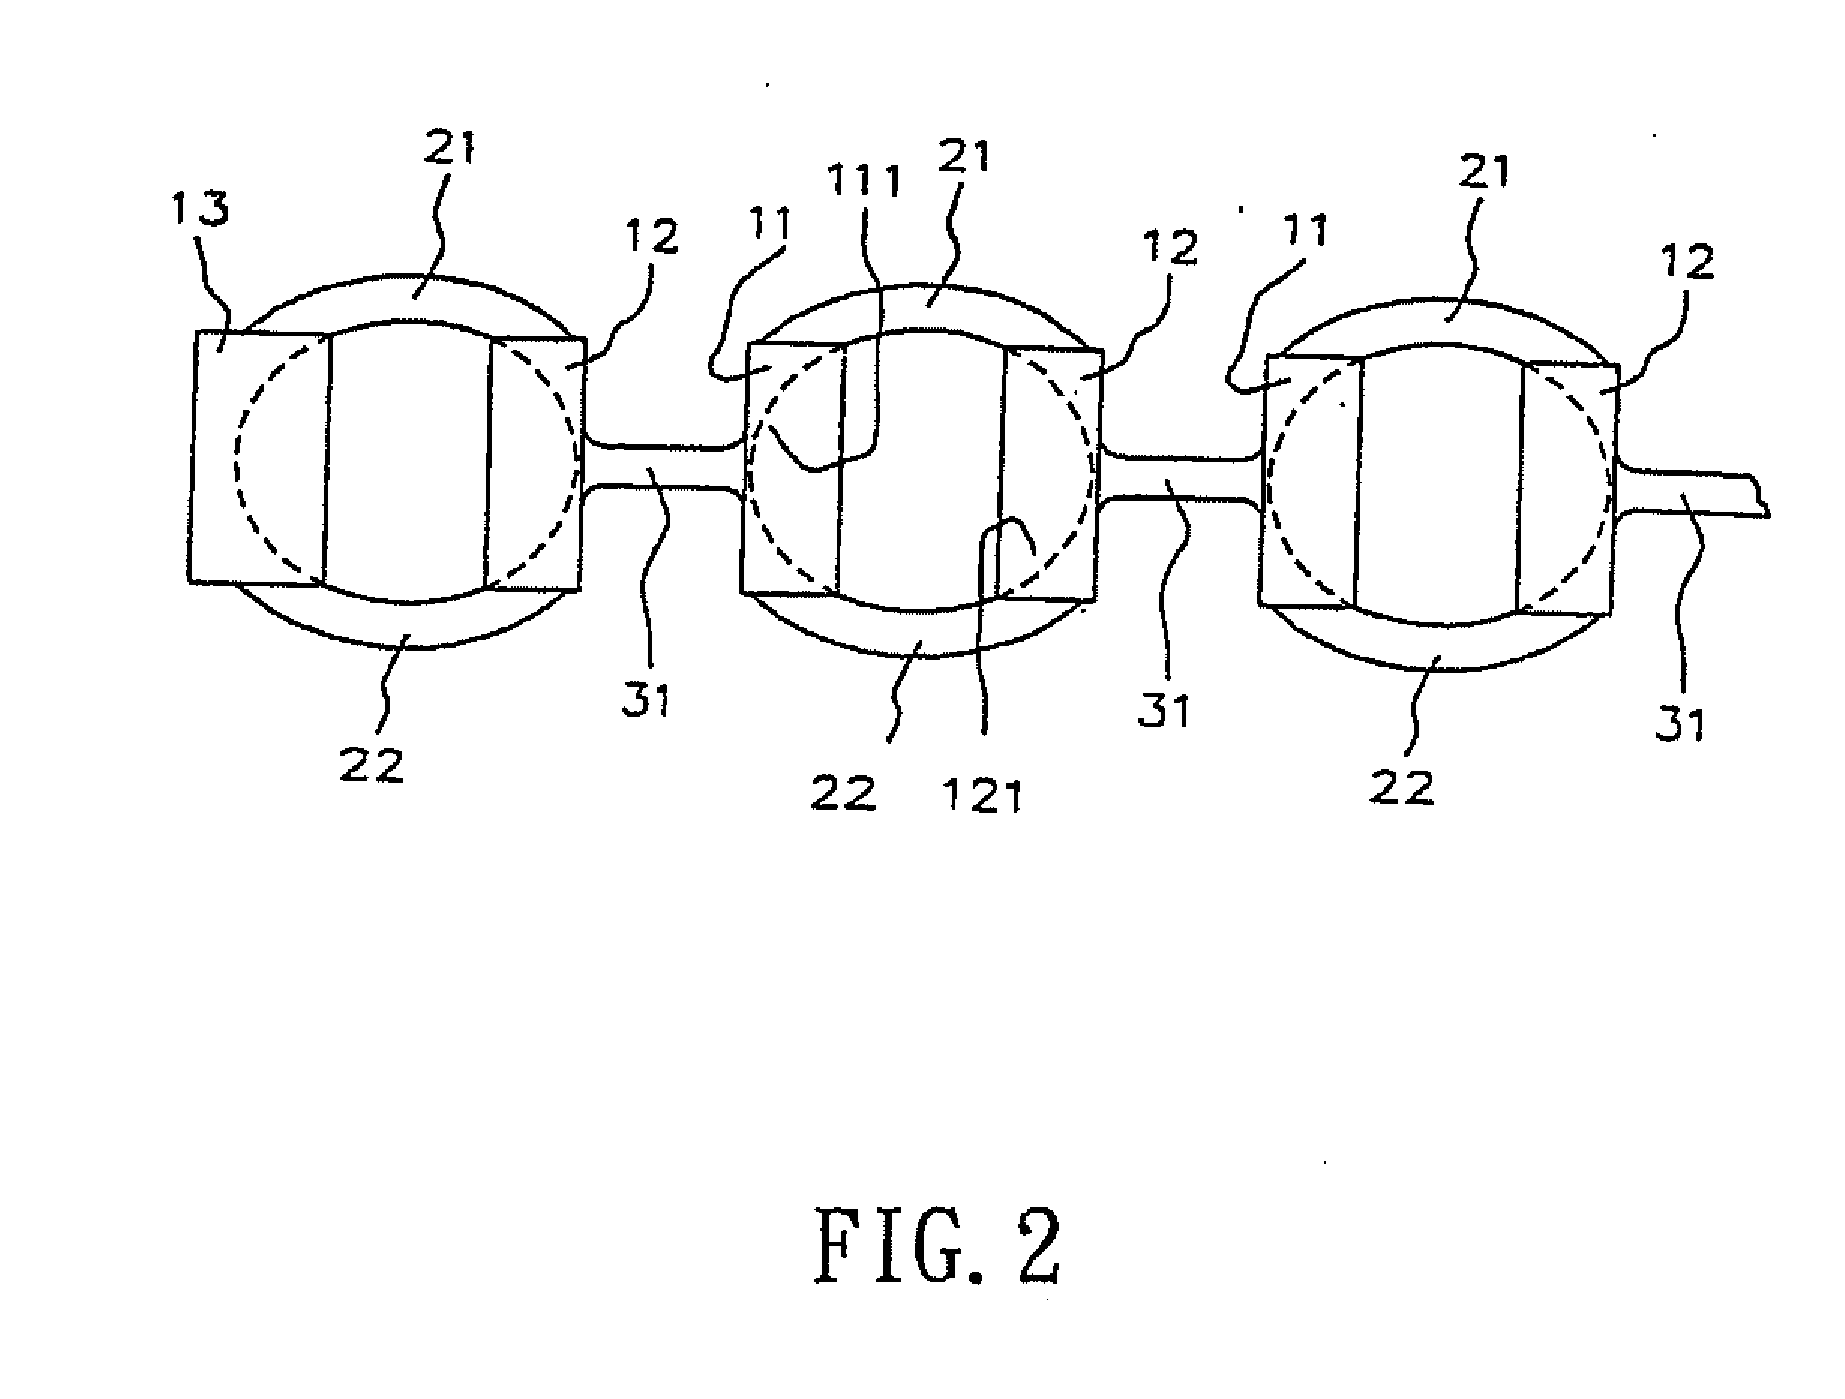 Ball Connecting Body for a Rolling Motion Apparatus